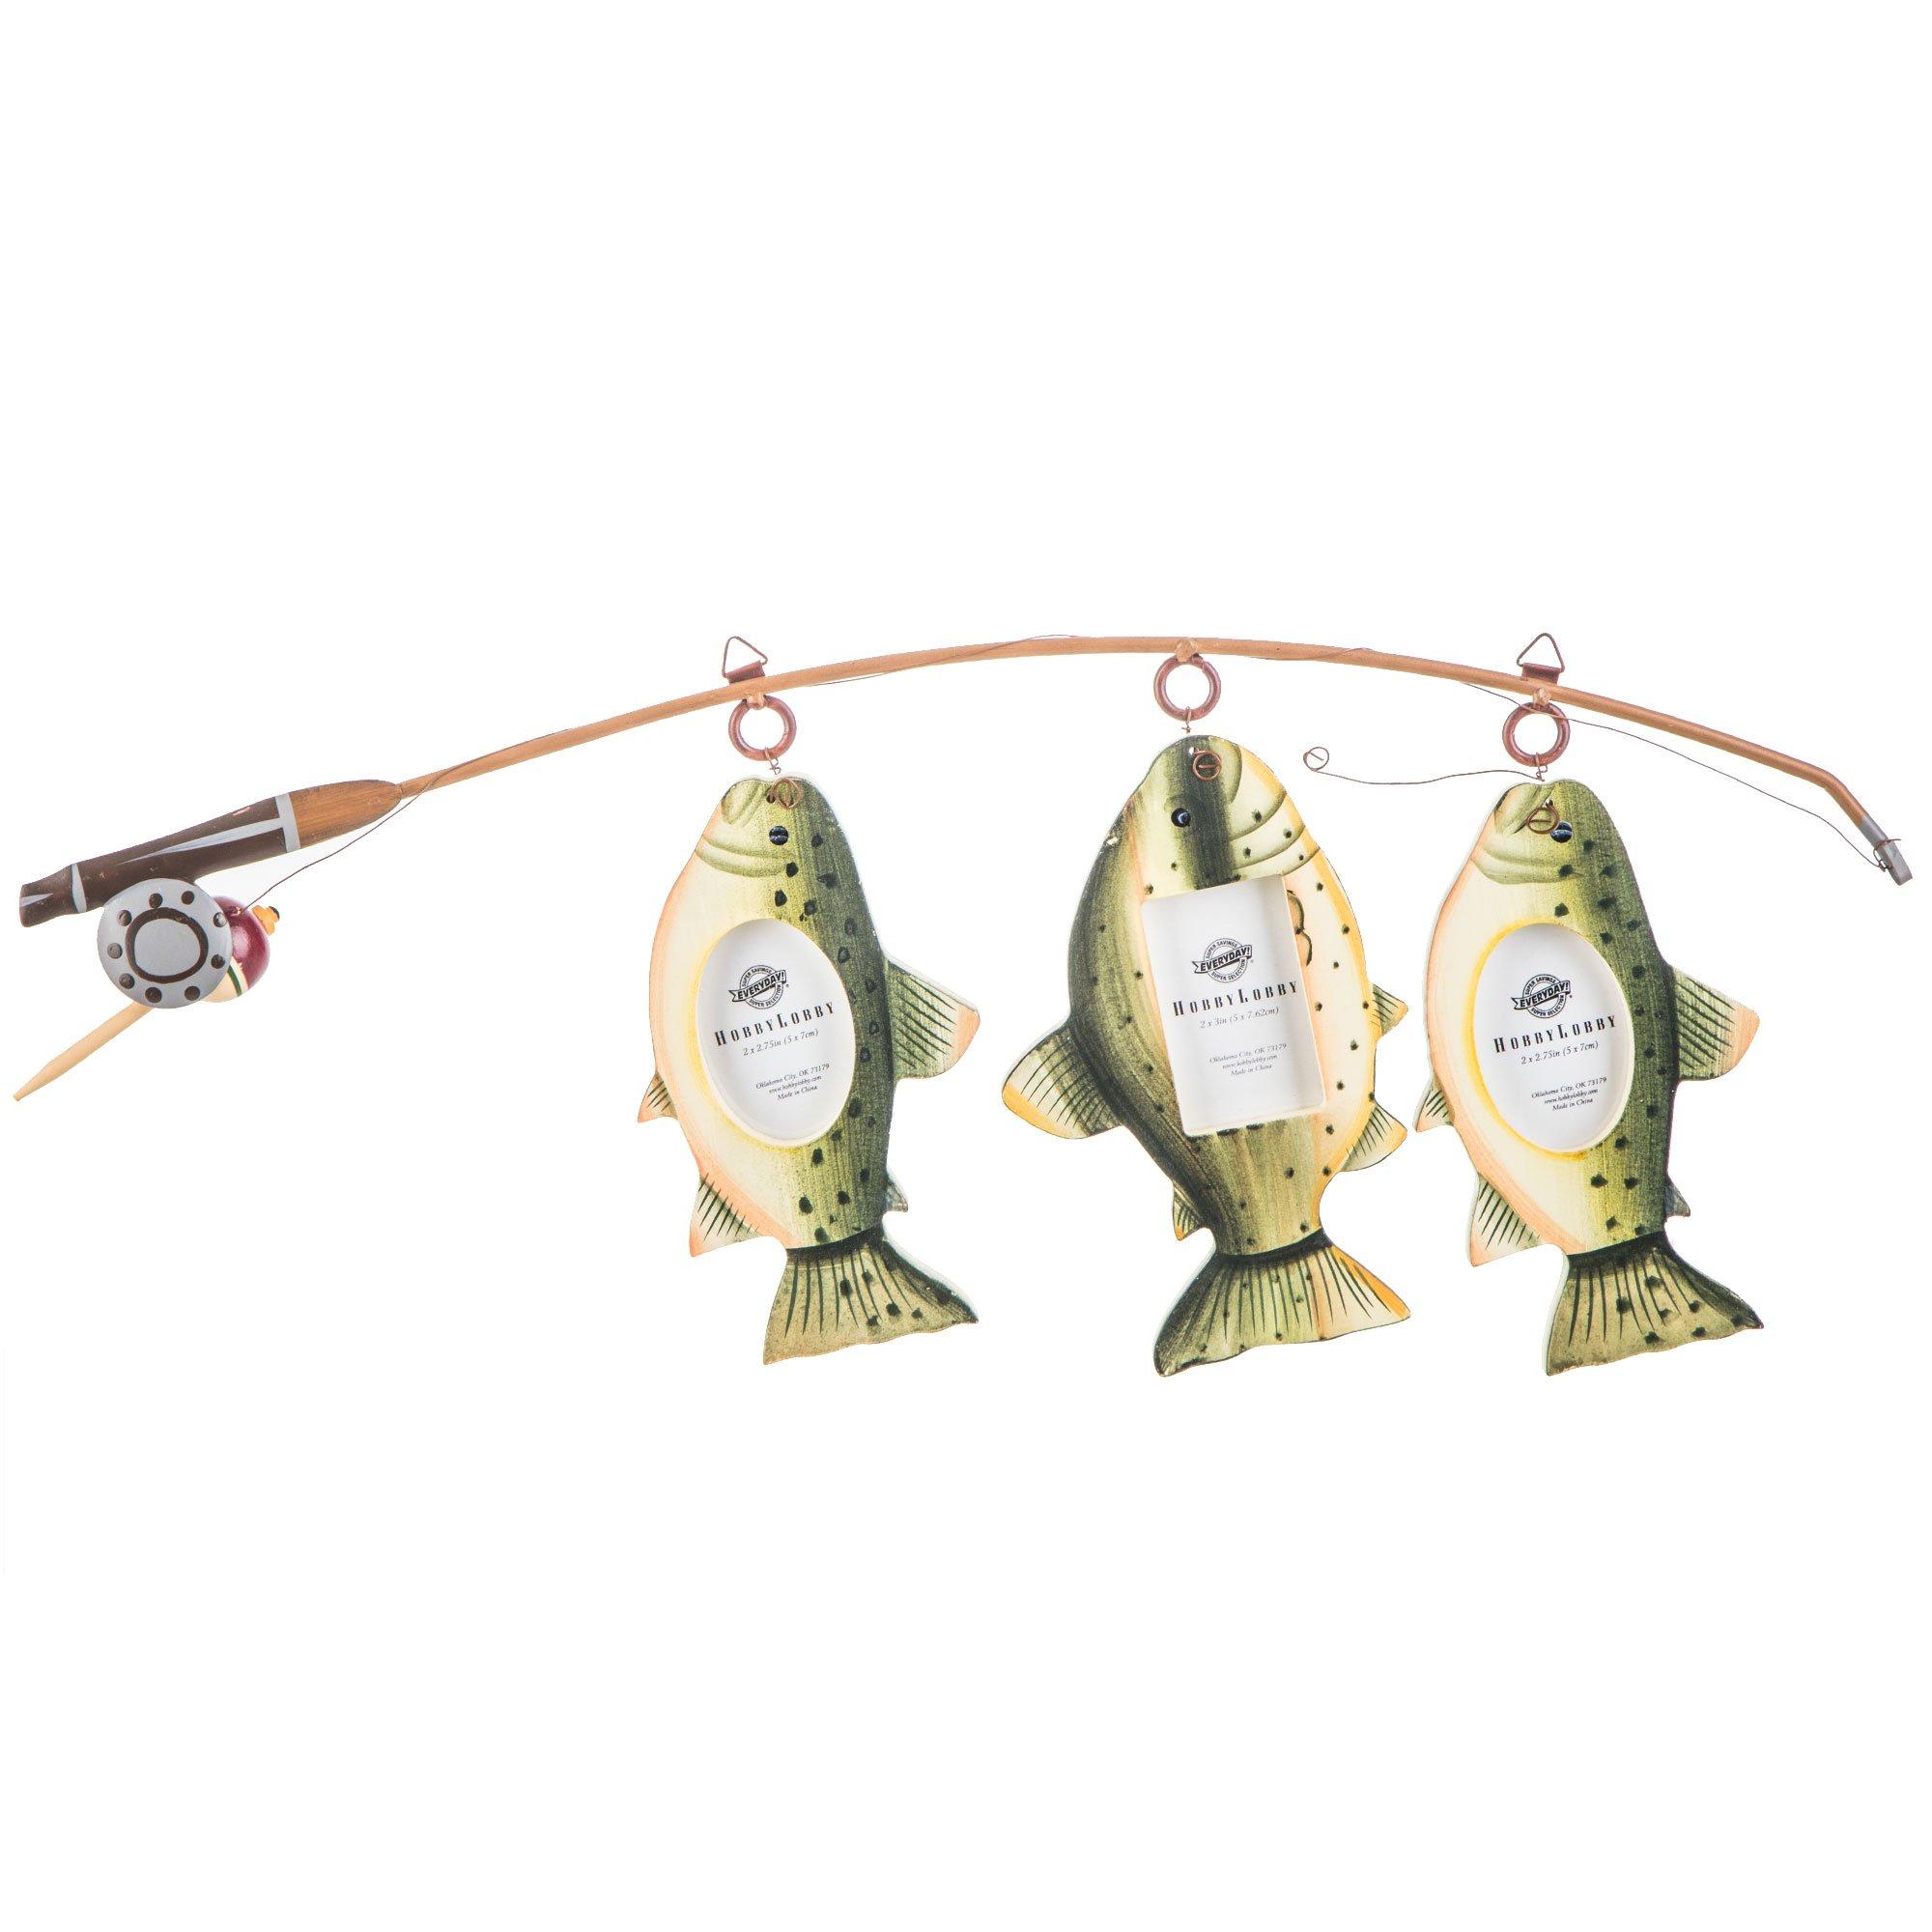 HOBBY LOBBY WALL Cabin Decor. Fishing Pole With 3 Fish Picture